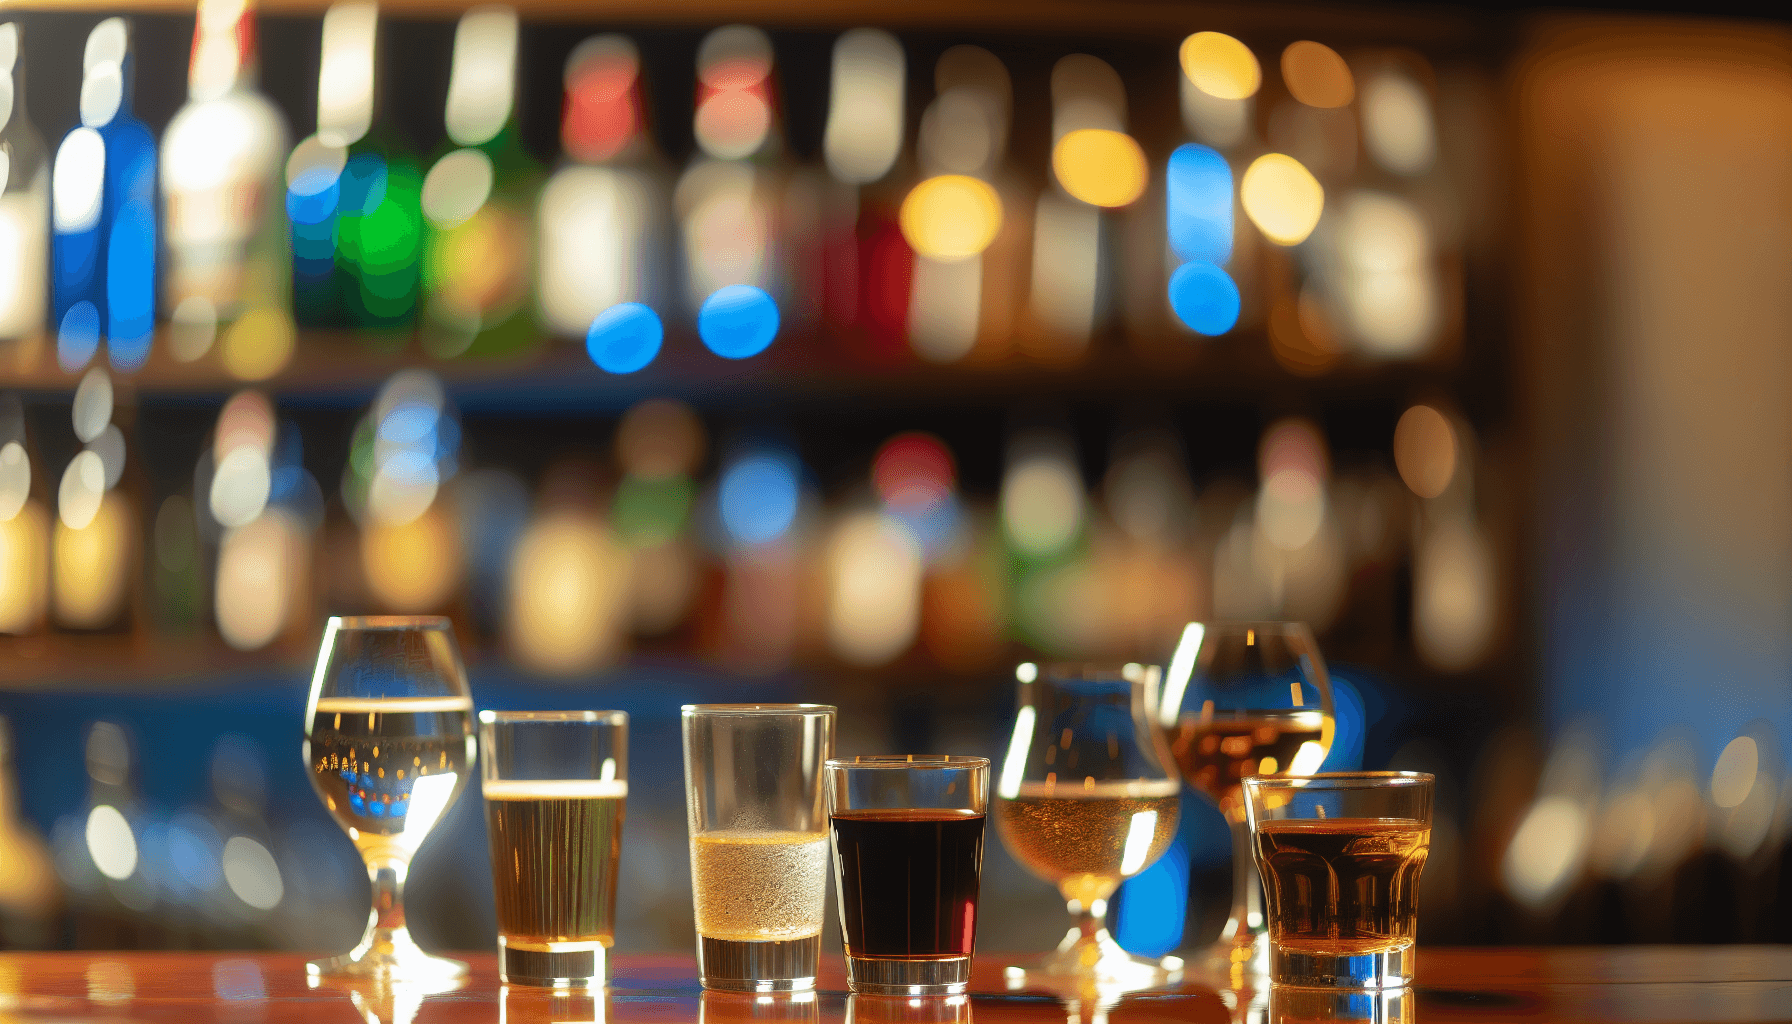 Photo of alcohol glasses with blurred background